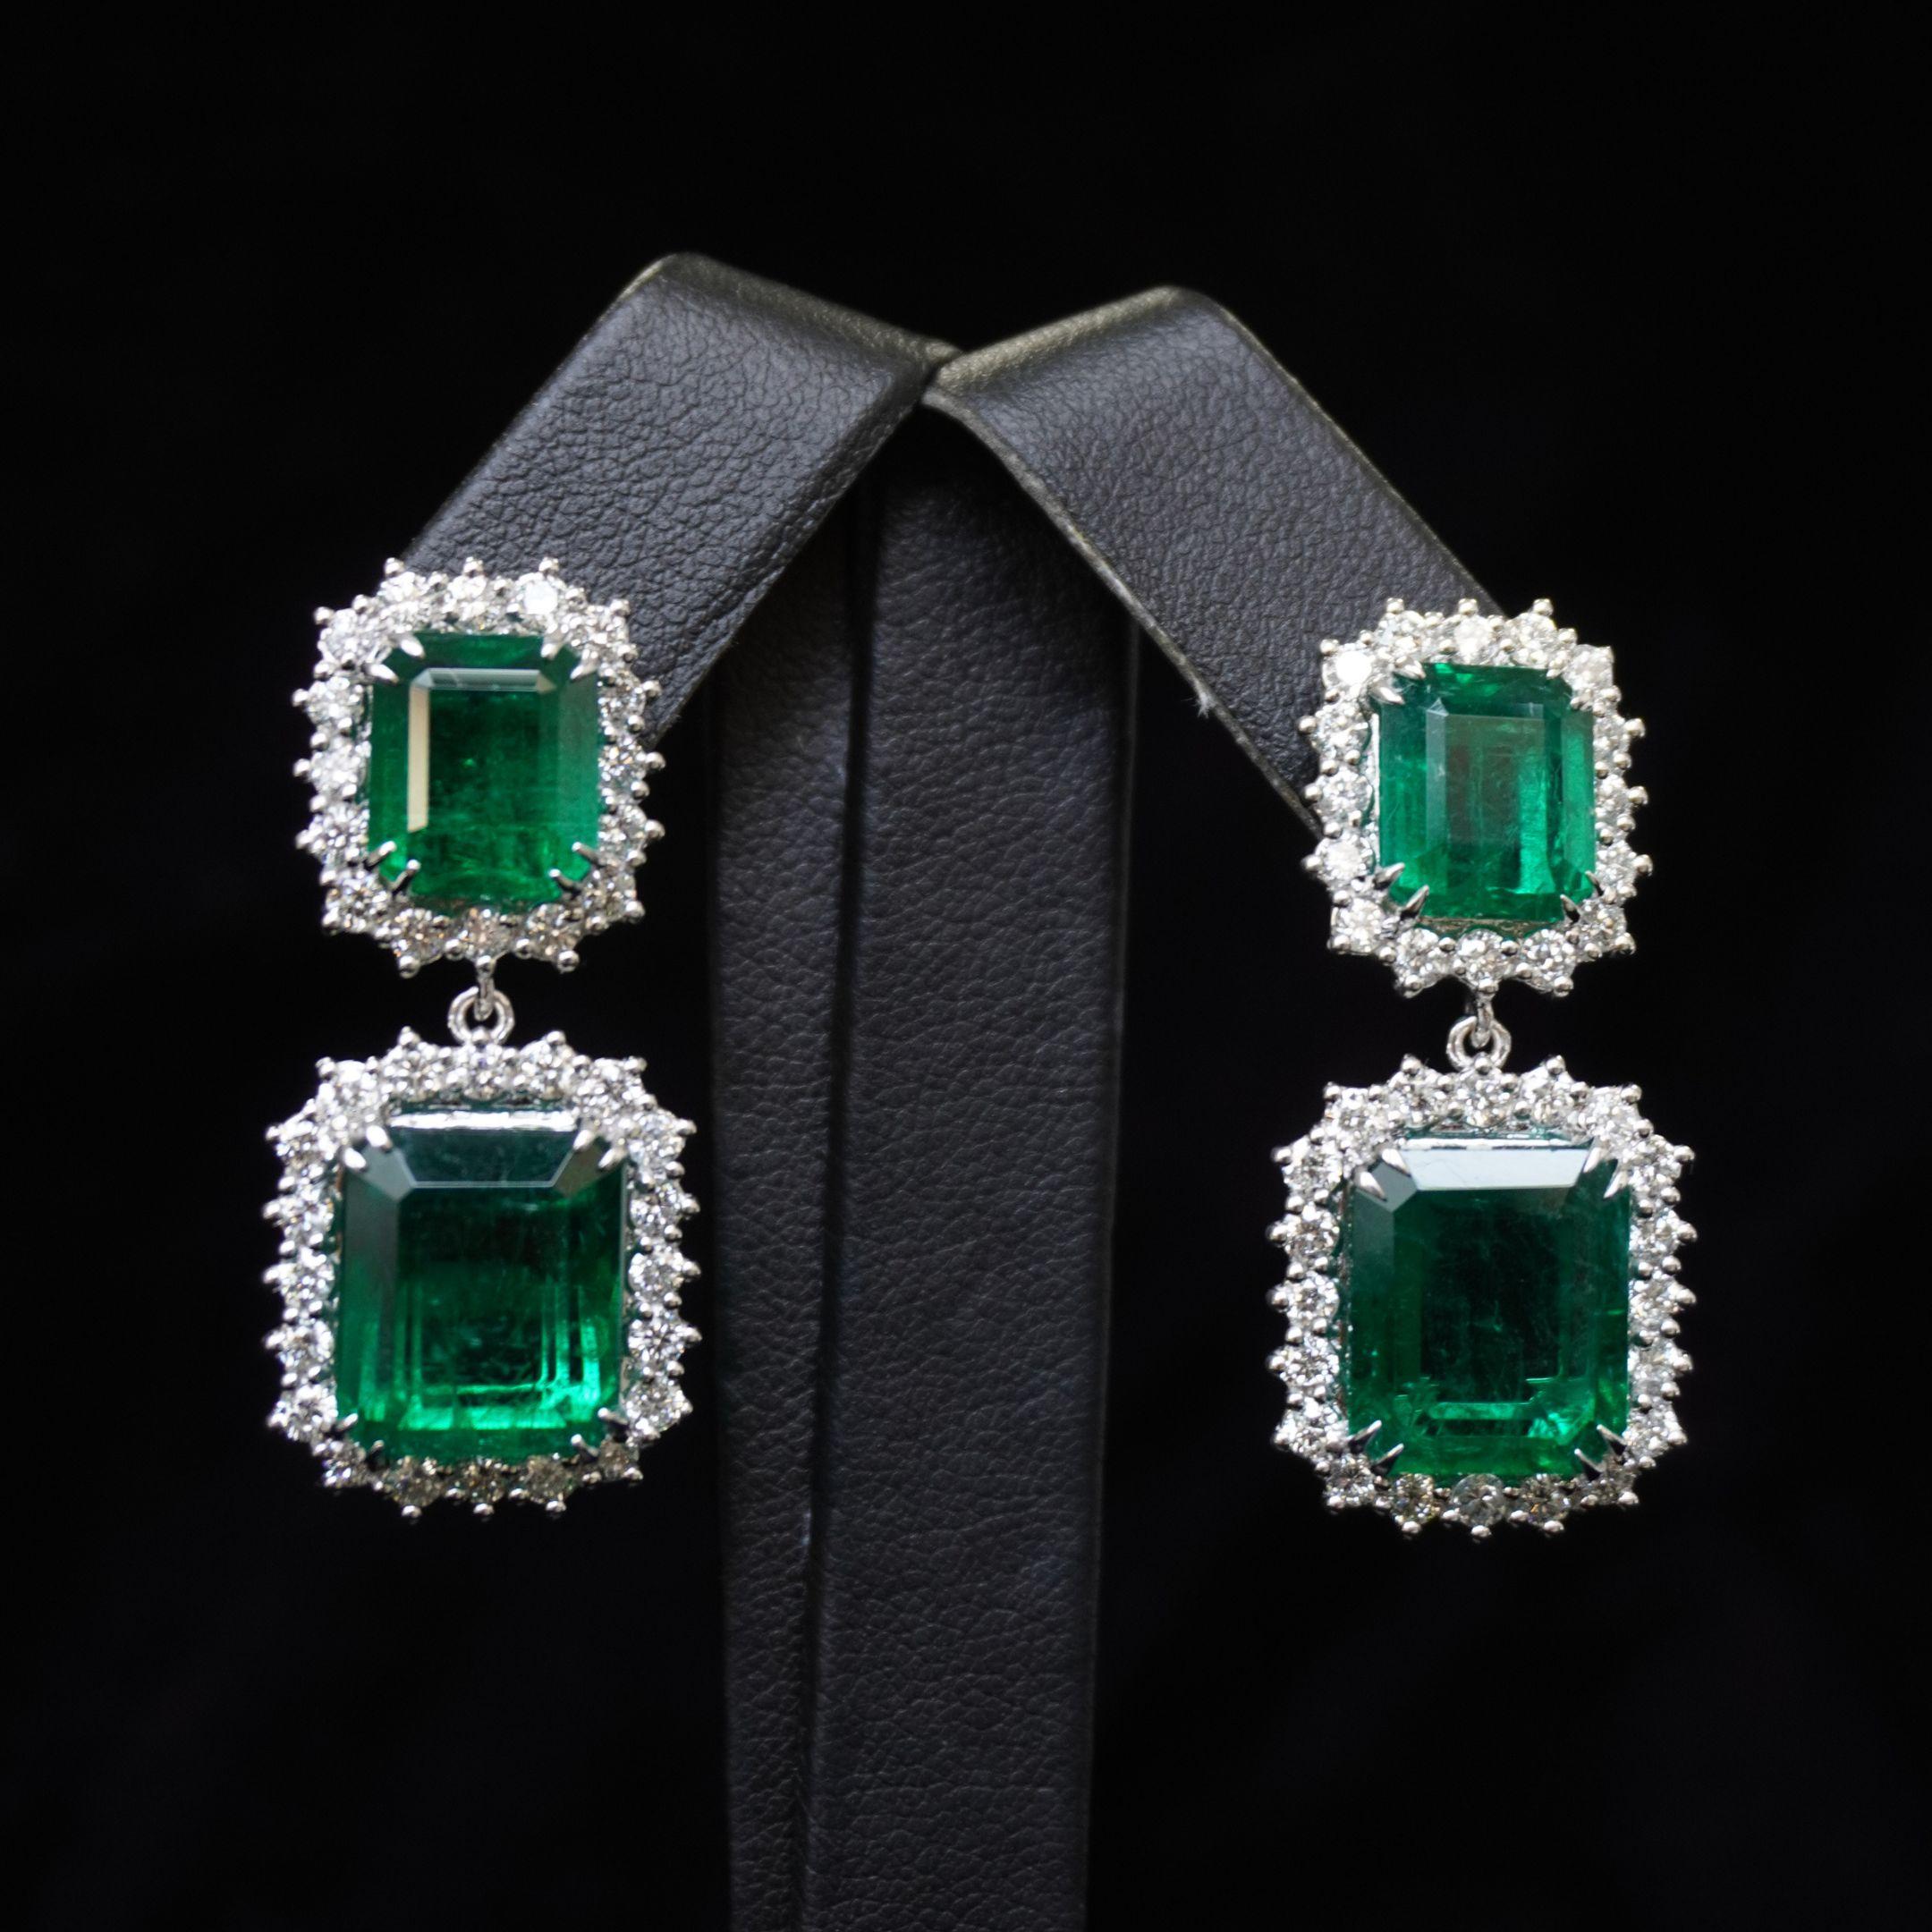 Emerald Weight: 20.11 CT
Diamond Weight: 2.52 CT 72 pcs 2mm
Metal: 18K White Gold
Gold Weight: 13.66 gm
Shape: Emerald-Cut
Color: Vivid Green
Hardness: 7.5-8
Birthstone: May
Product ID: MUR25319/Line 6
Lab Report: CD Certificate(123-124) (1054-55)